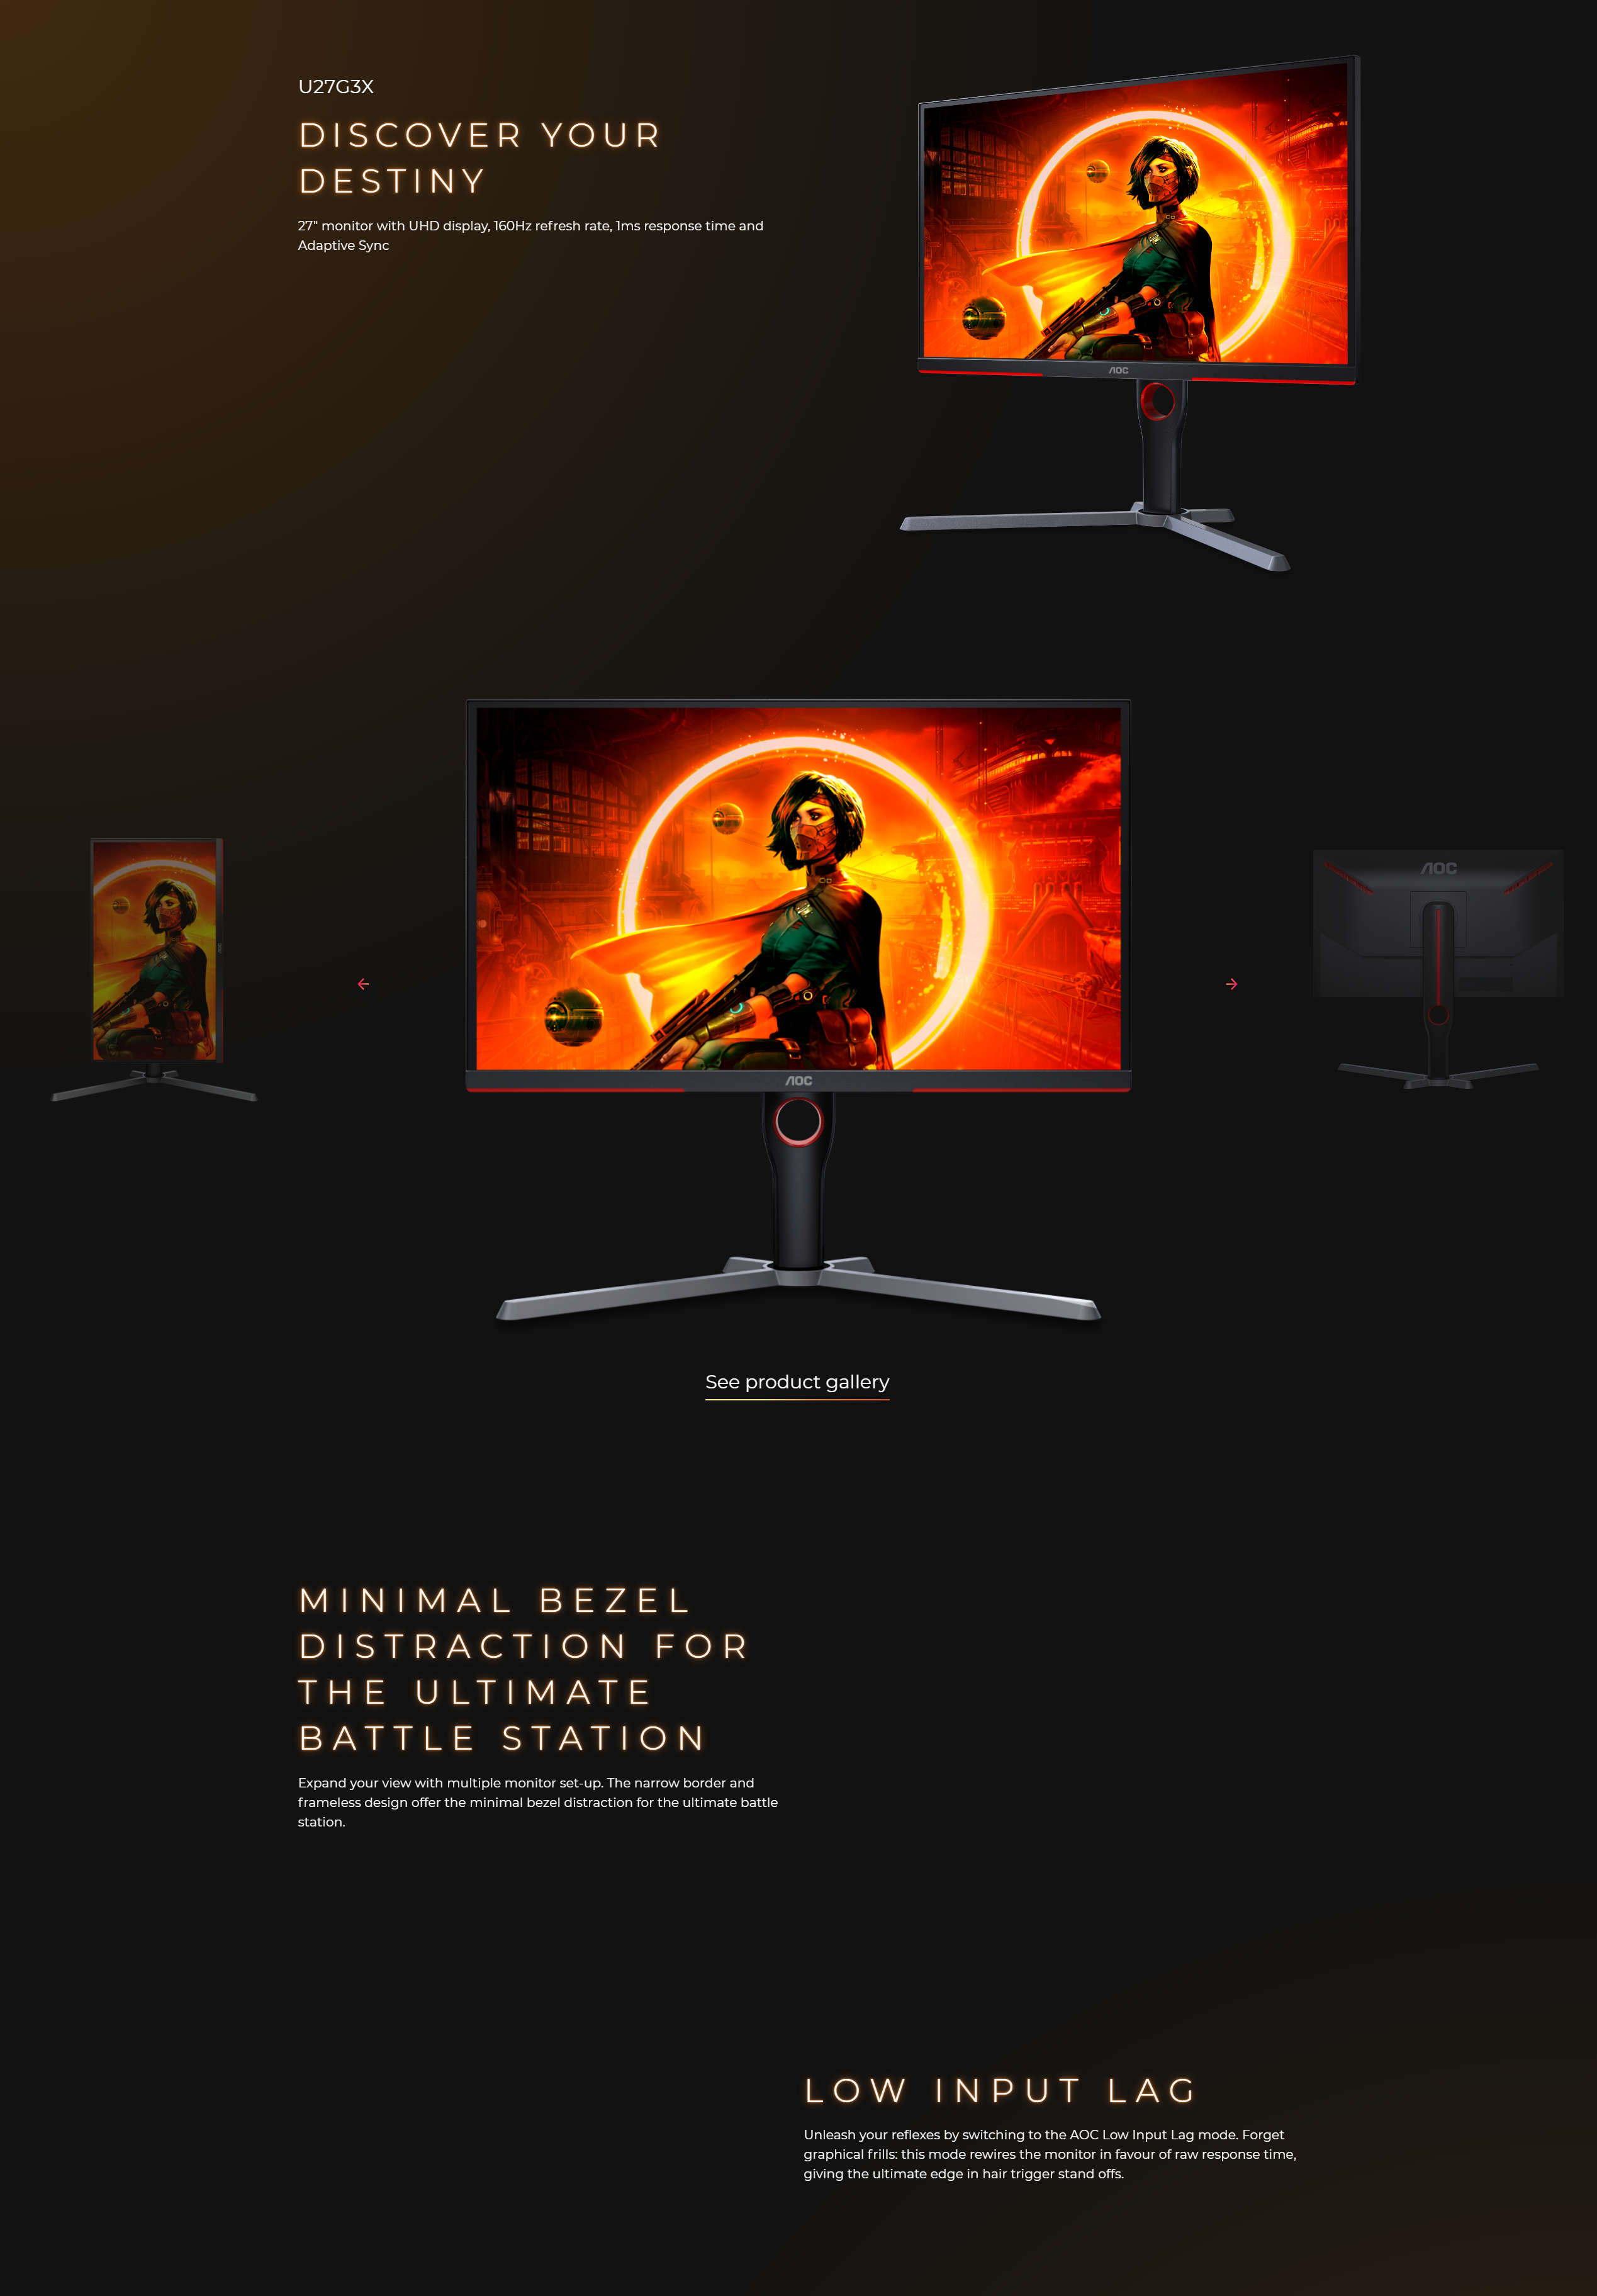 A large marketing image providing additional information about the product AOC Gaming U27G3X - 27" UHD 160Hz IPS Monitor - Additional alt info not provided